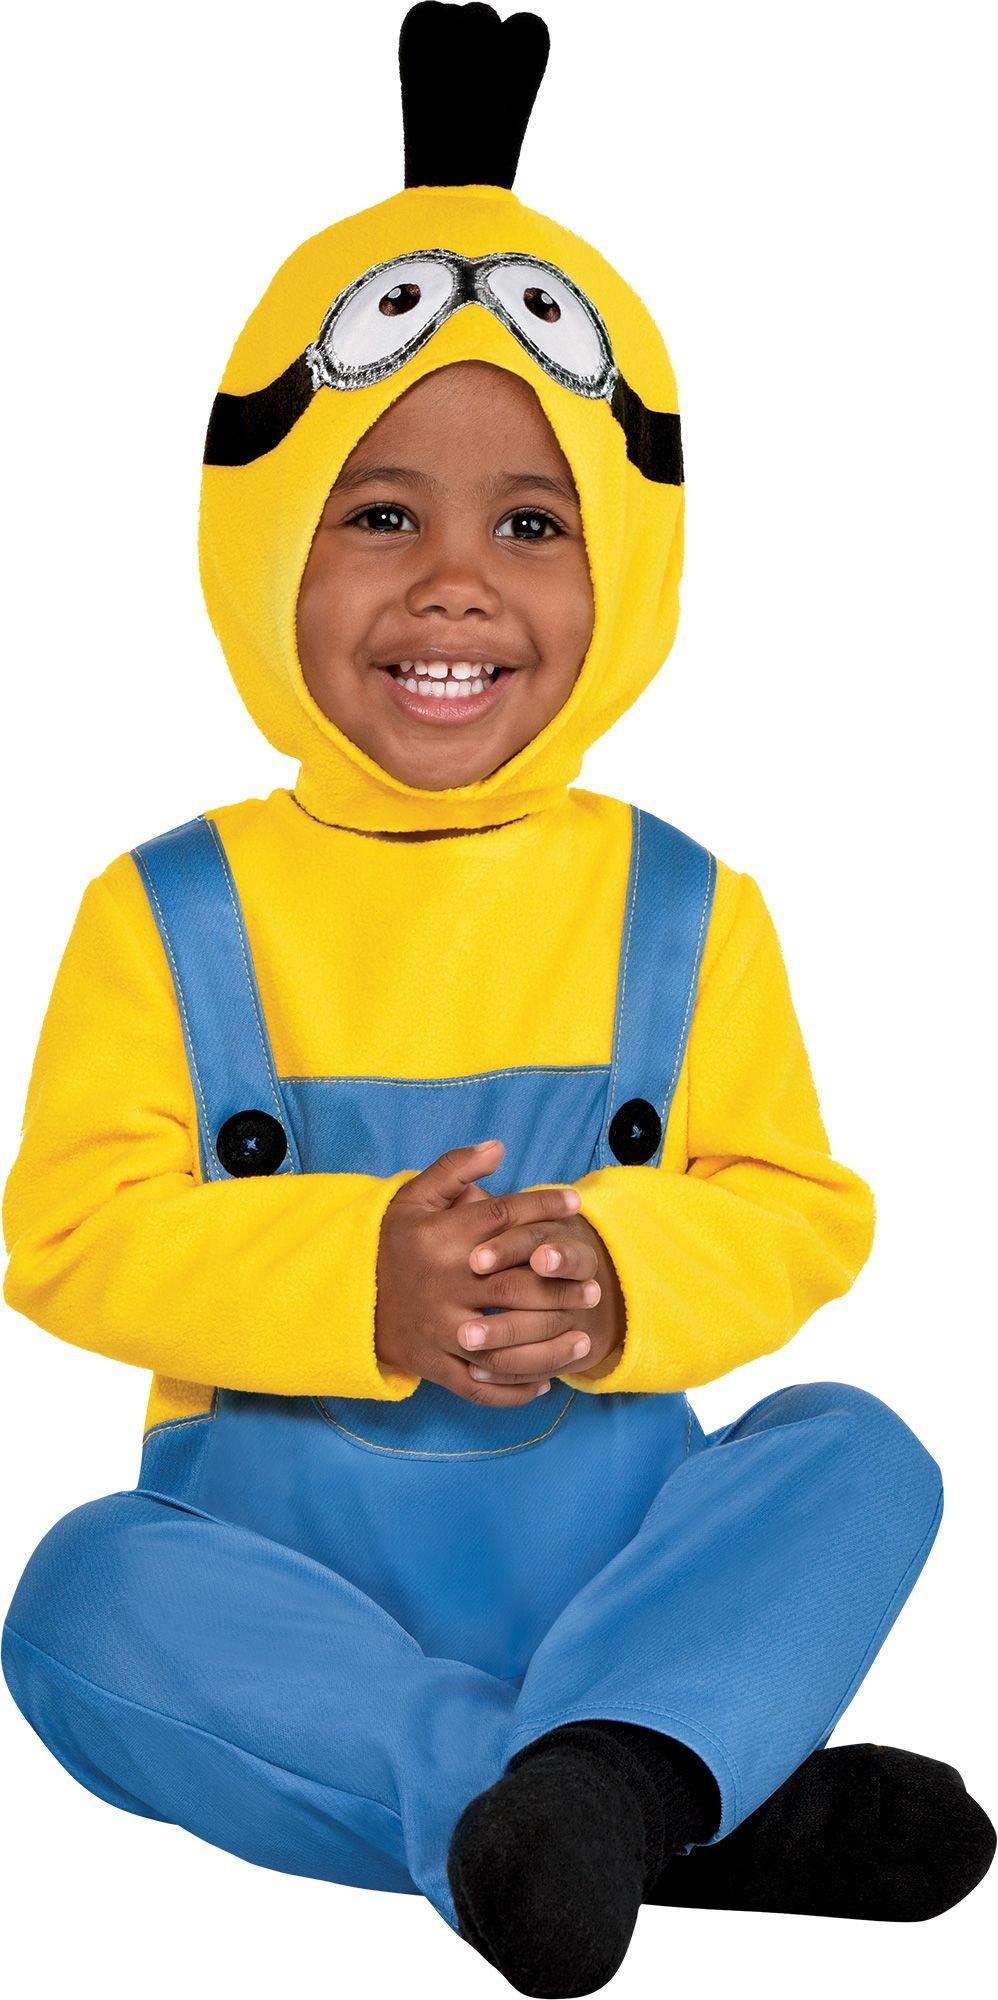 Minion Kevin Costume for Babies